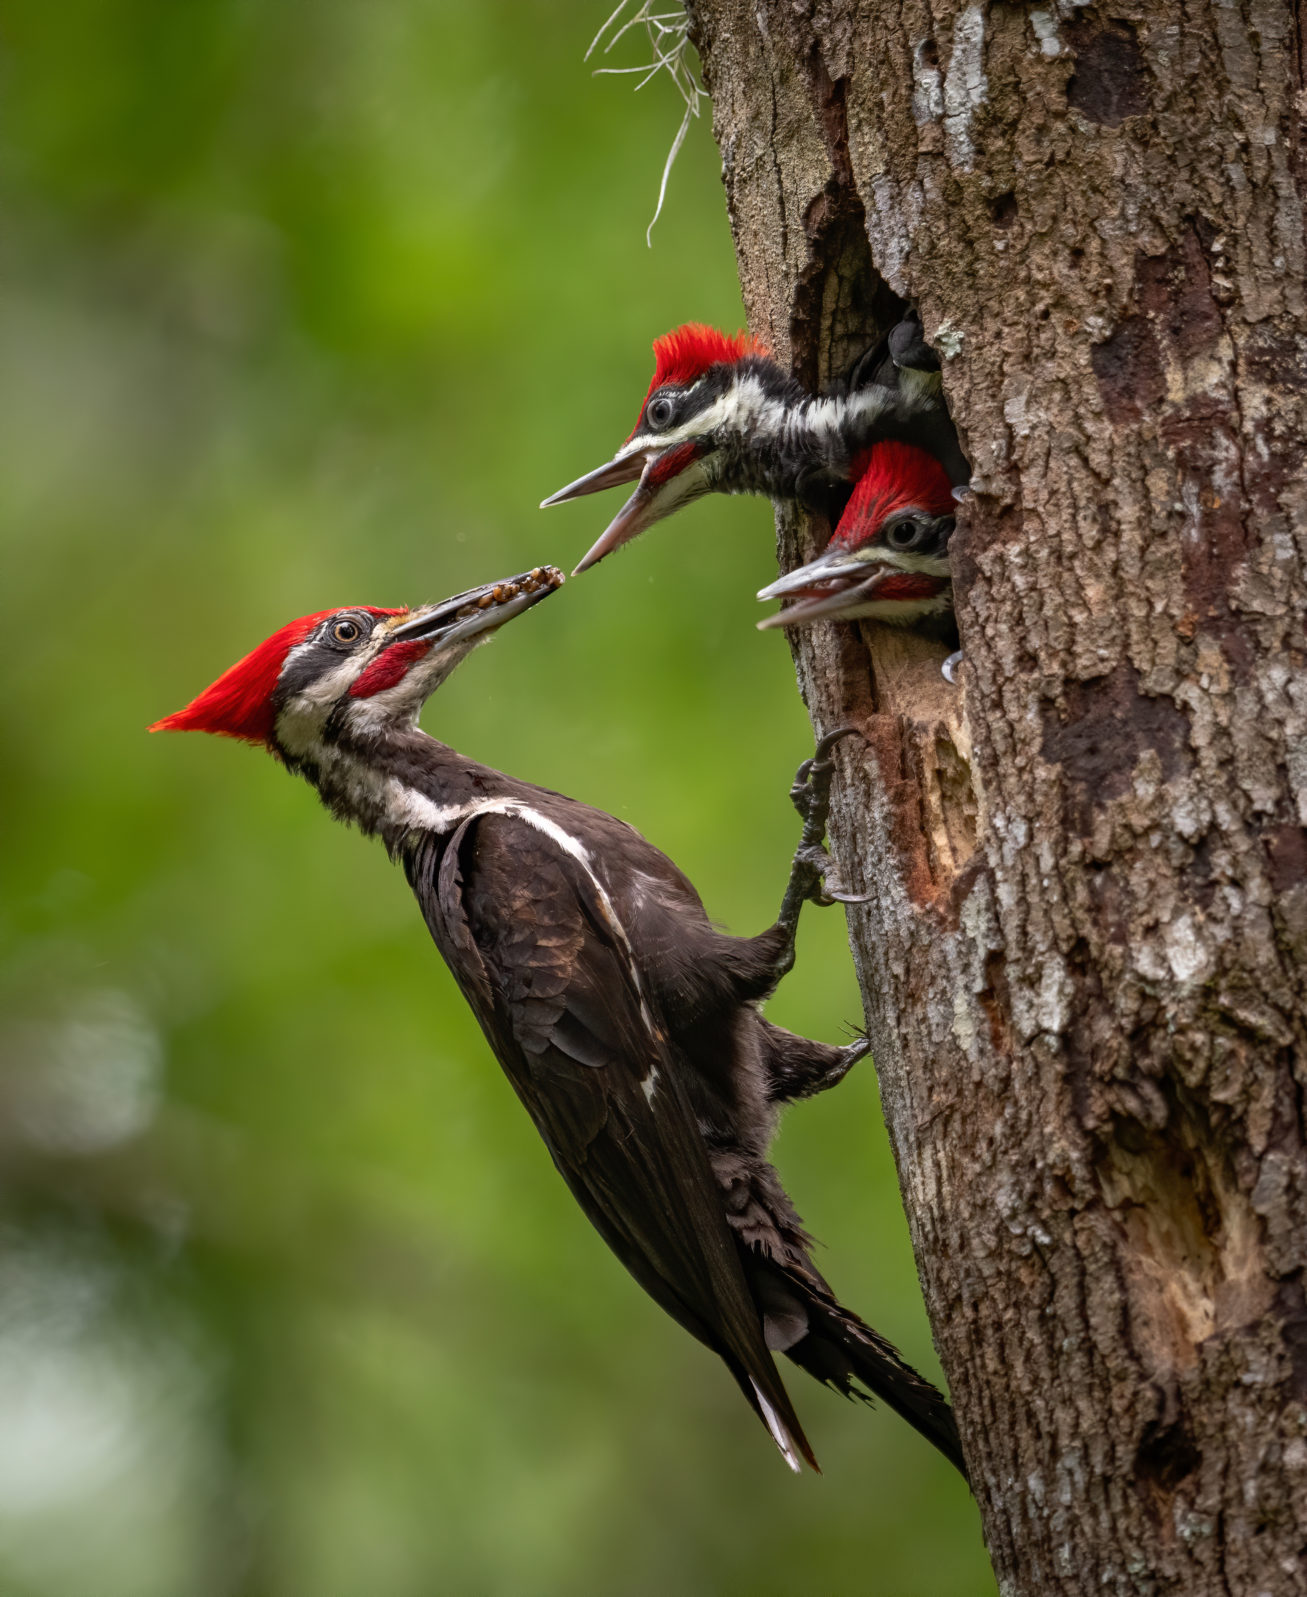 Pileated woodpecker nest in Florida